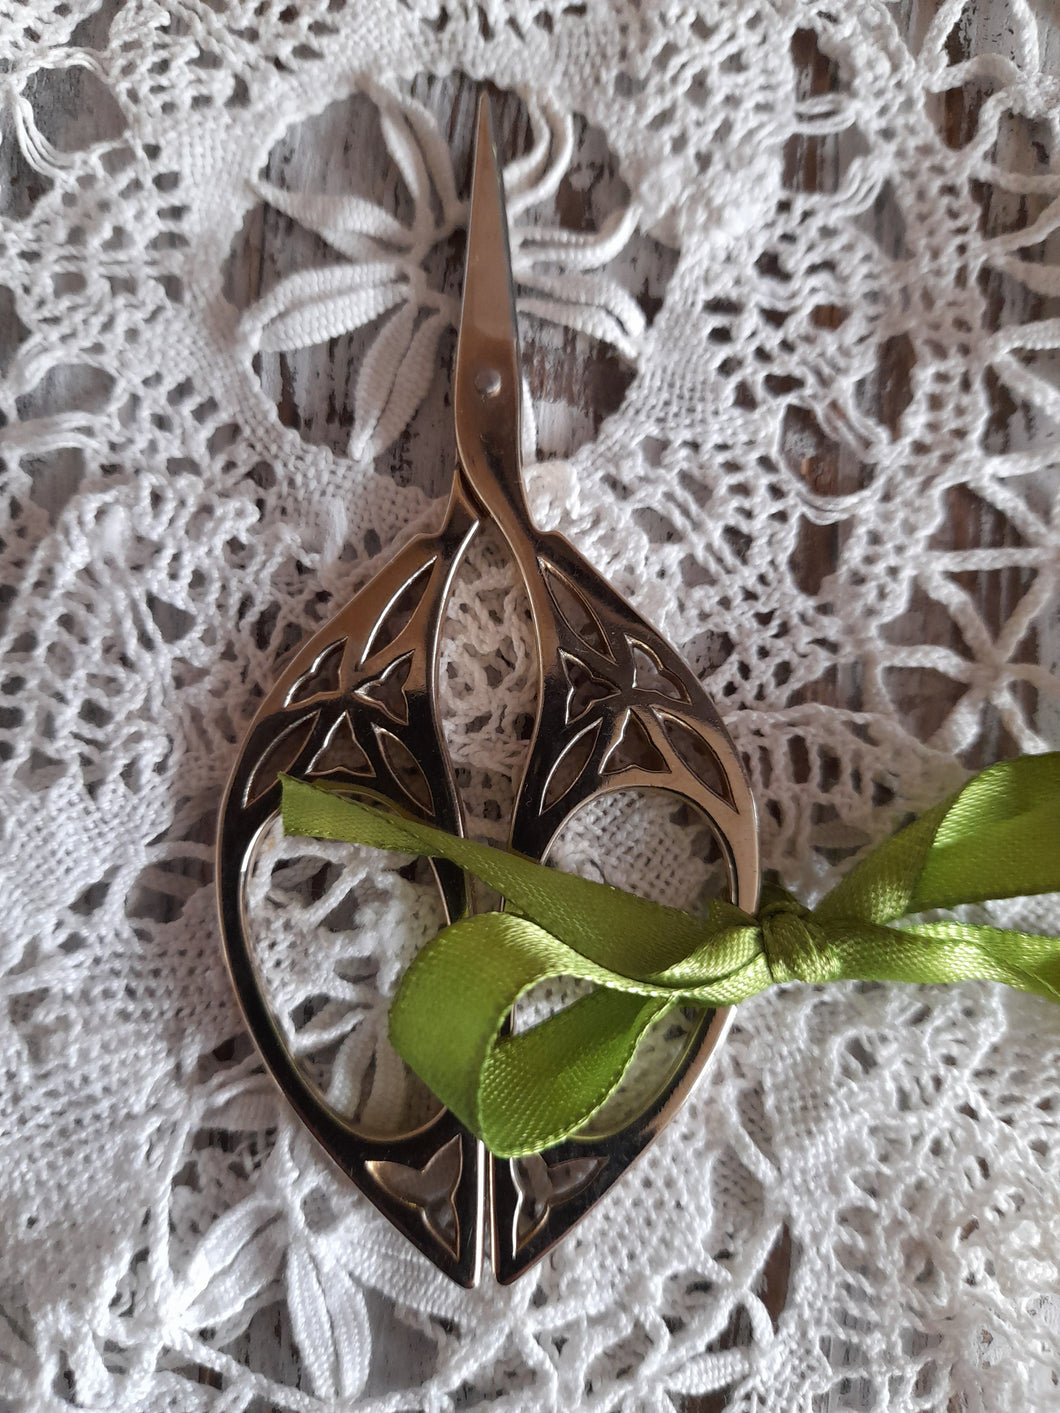 Pretty embroidery /sewing scissors